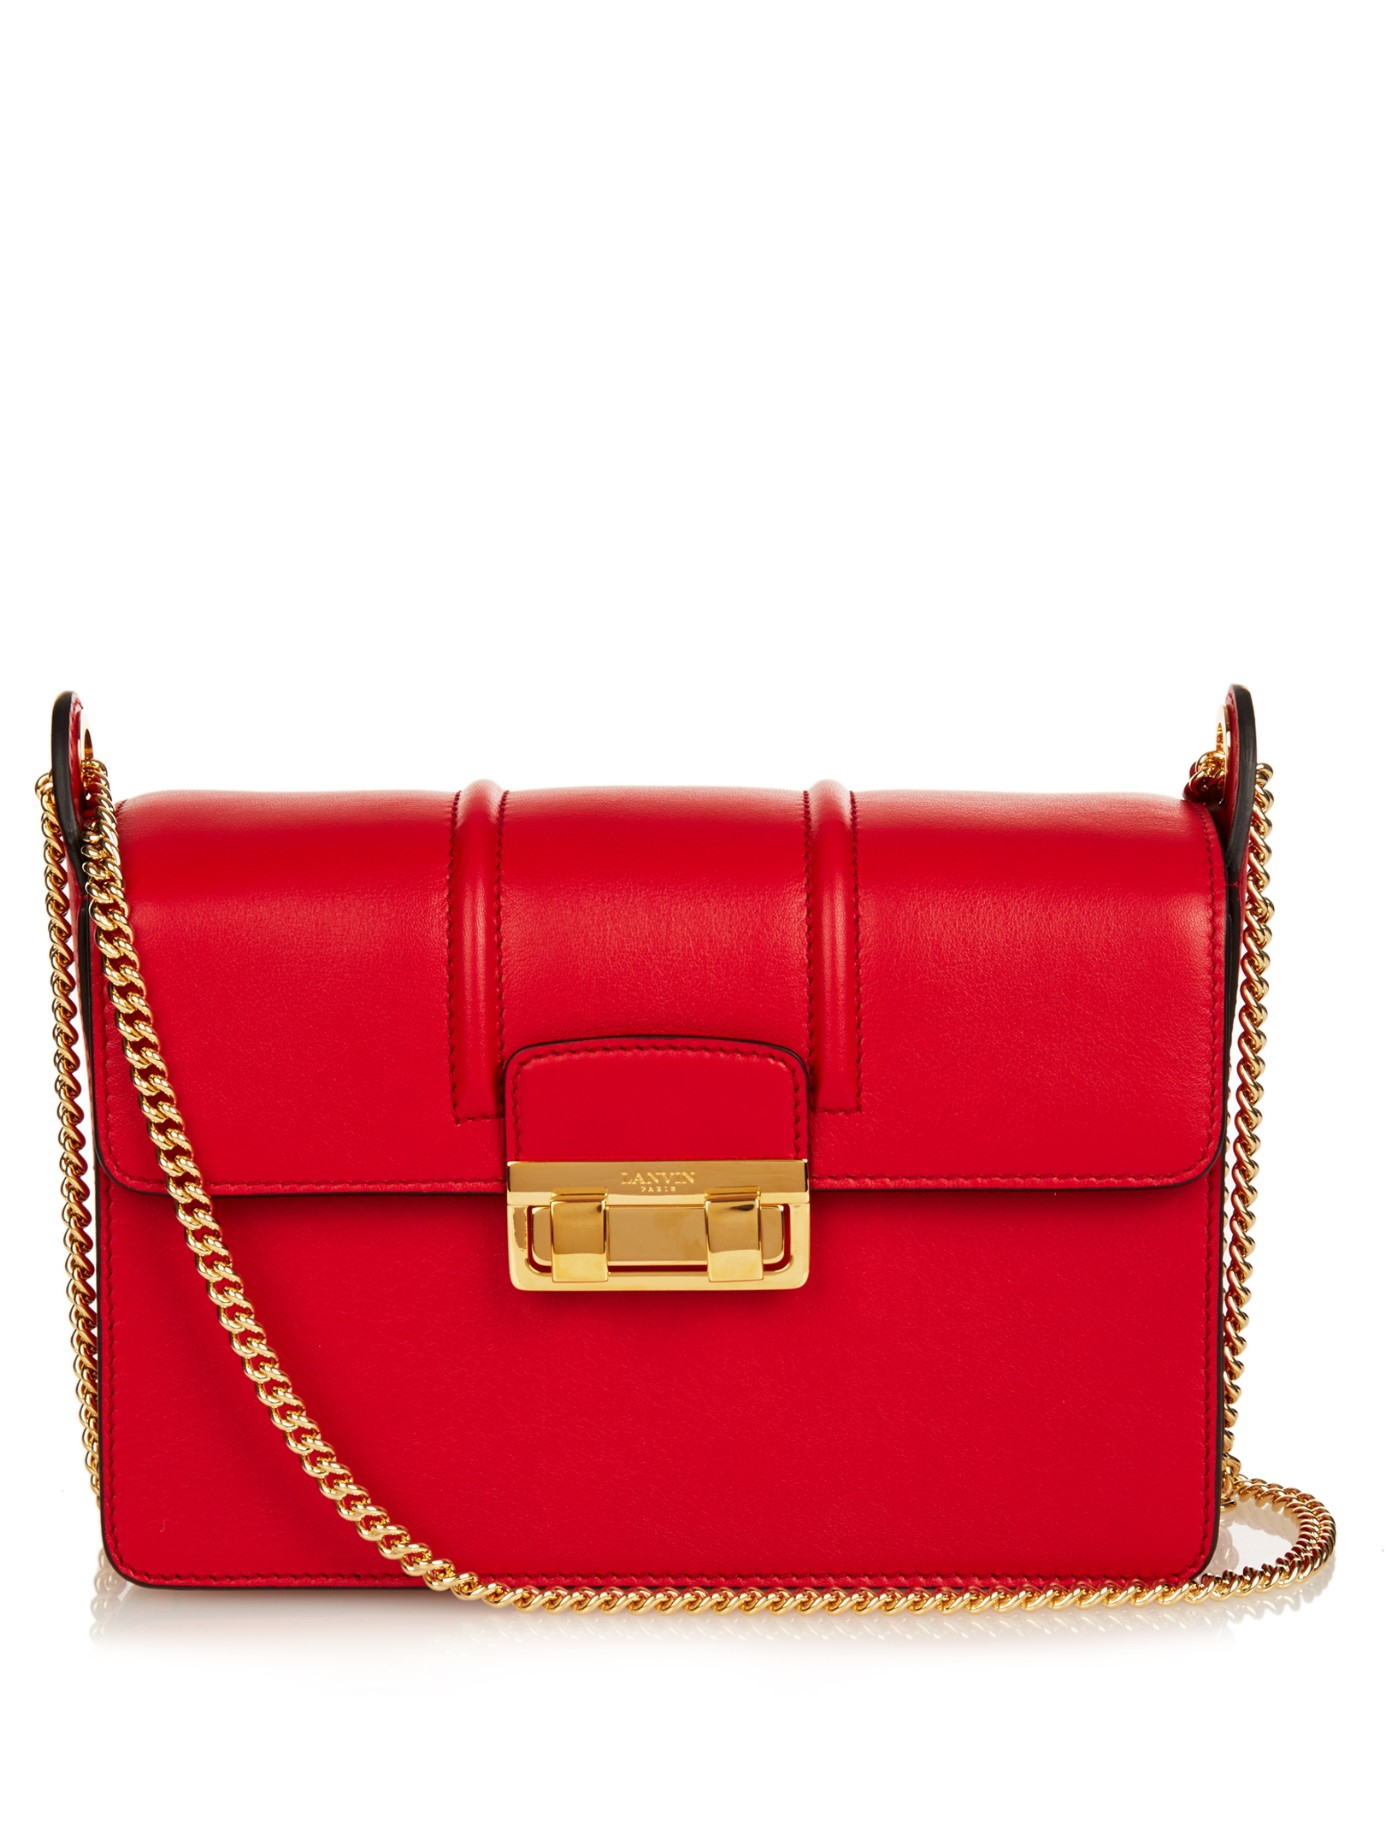 Lanvin Jiji Small Leather Shoulder Bag in Red - Lyst